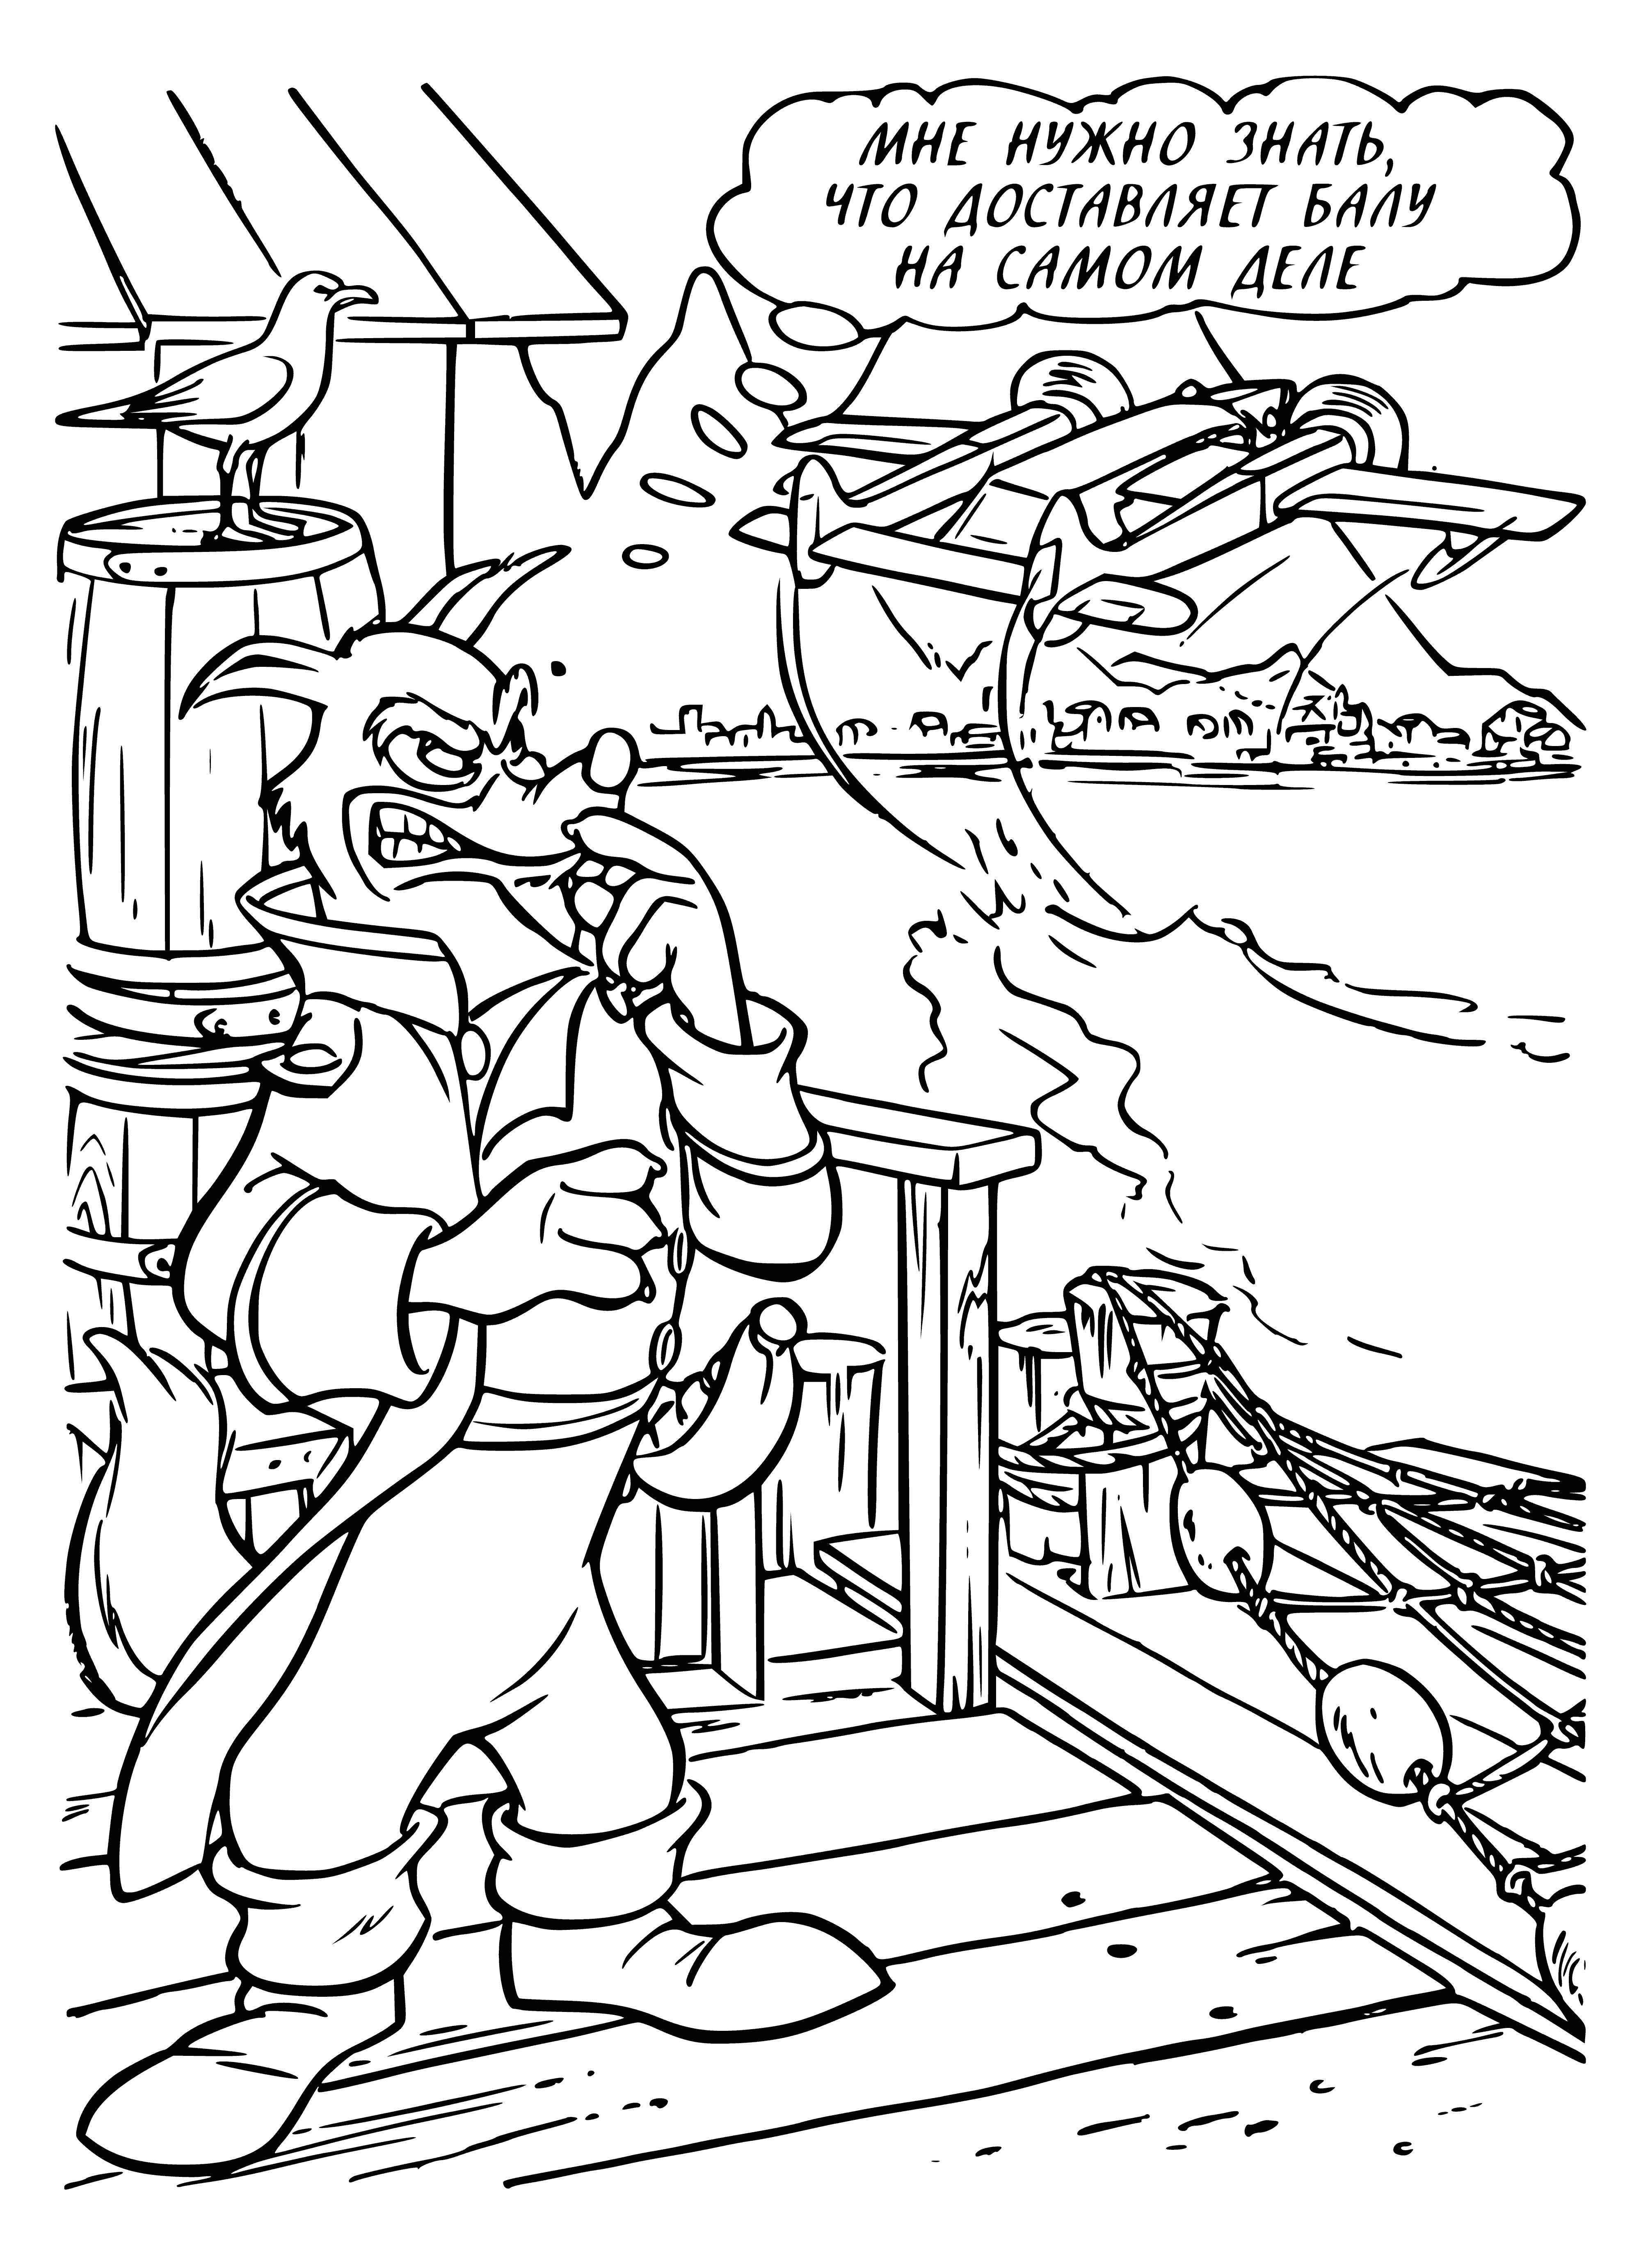 The pirate decides to trace coloring page